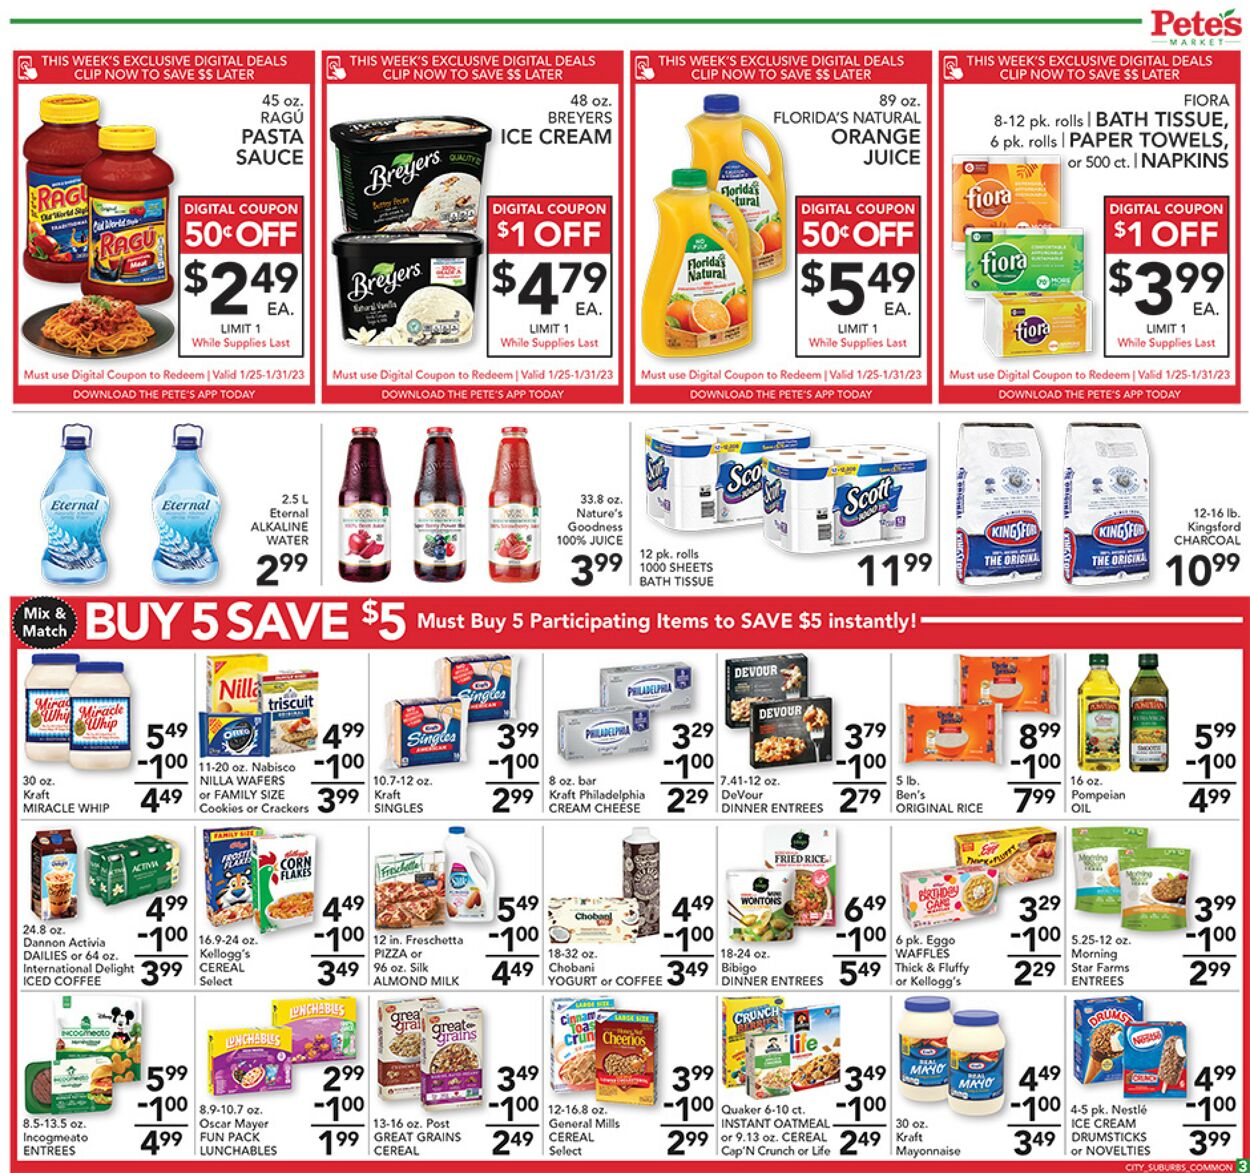 Pete's Fresh Market Current weekly ad 01/25 - 01/31/2023 [3] - frequent ...